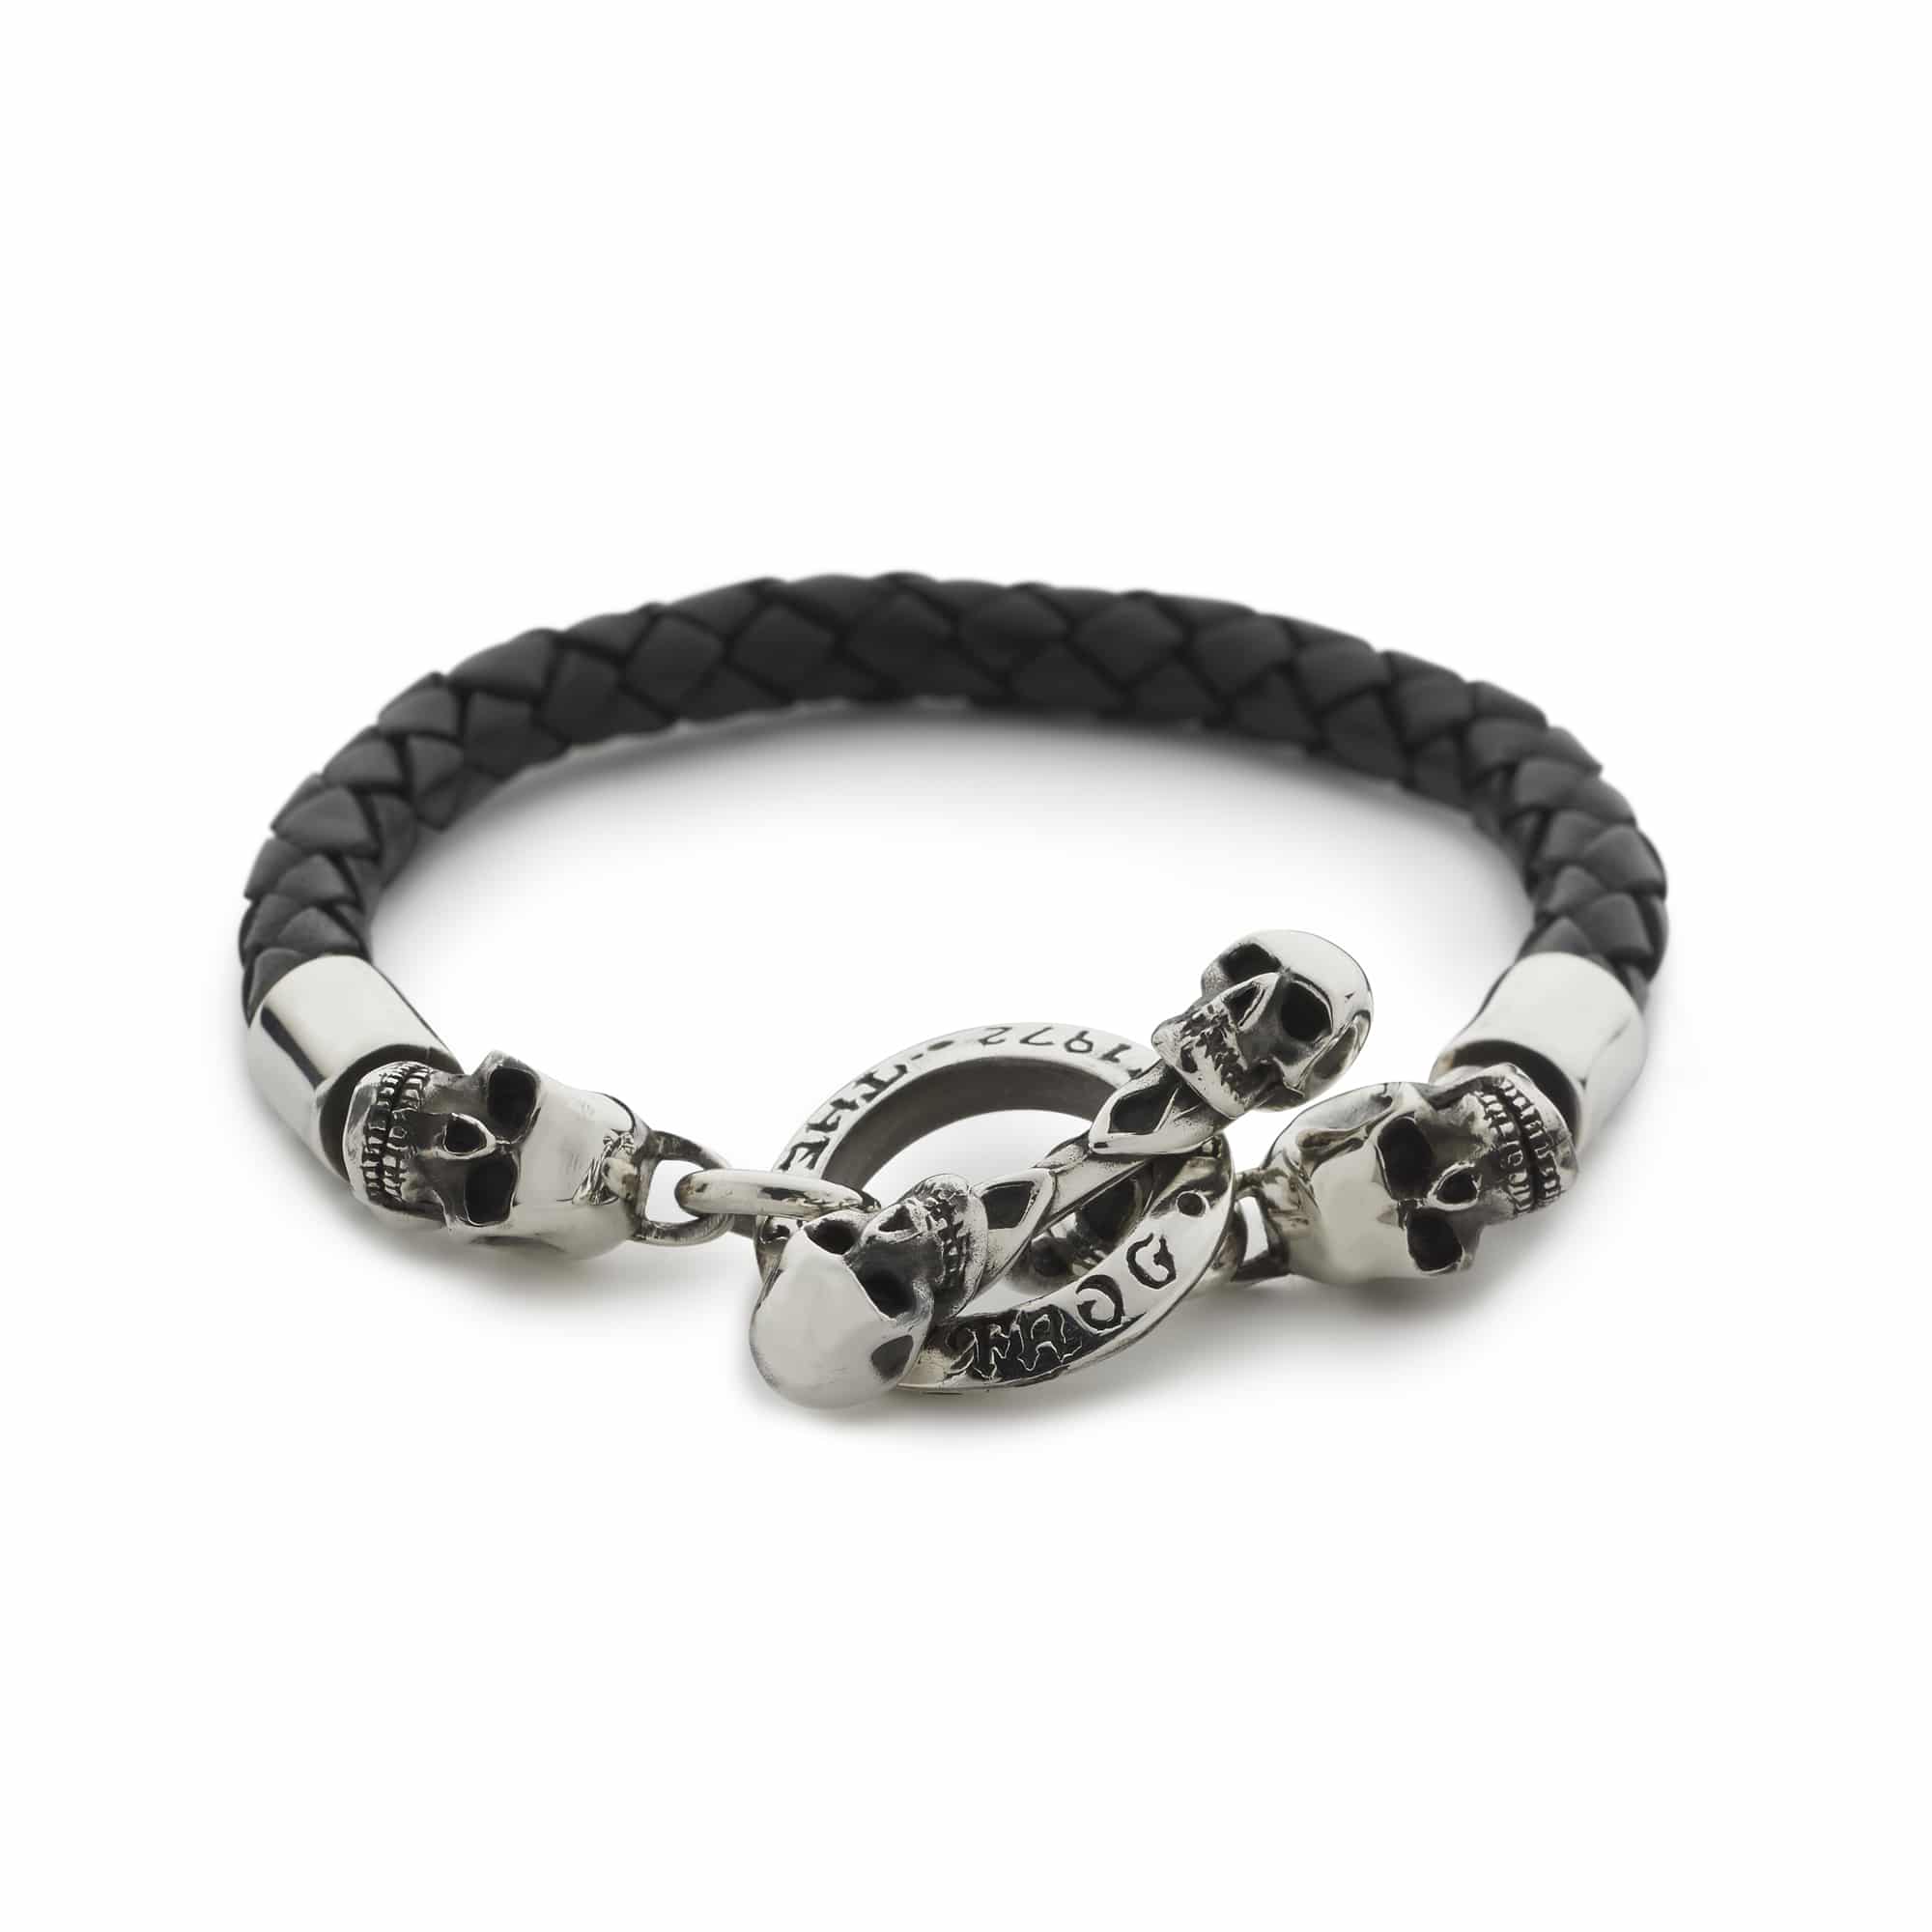 Black Woven Leather Bracelet – The Great Frog